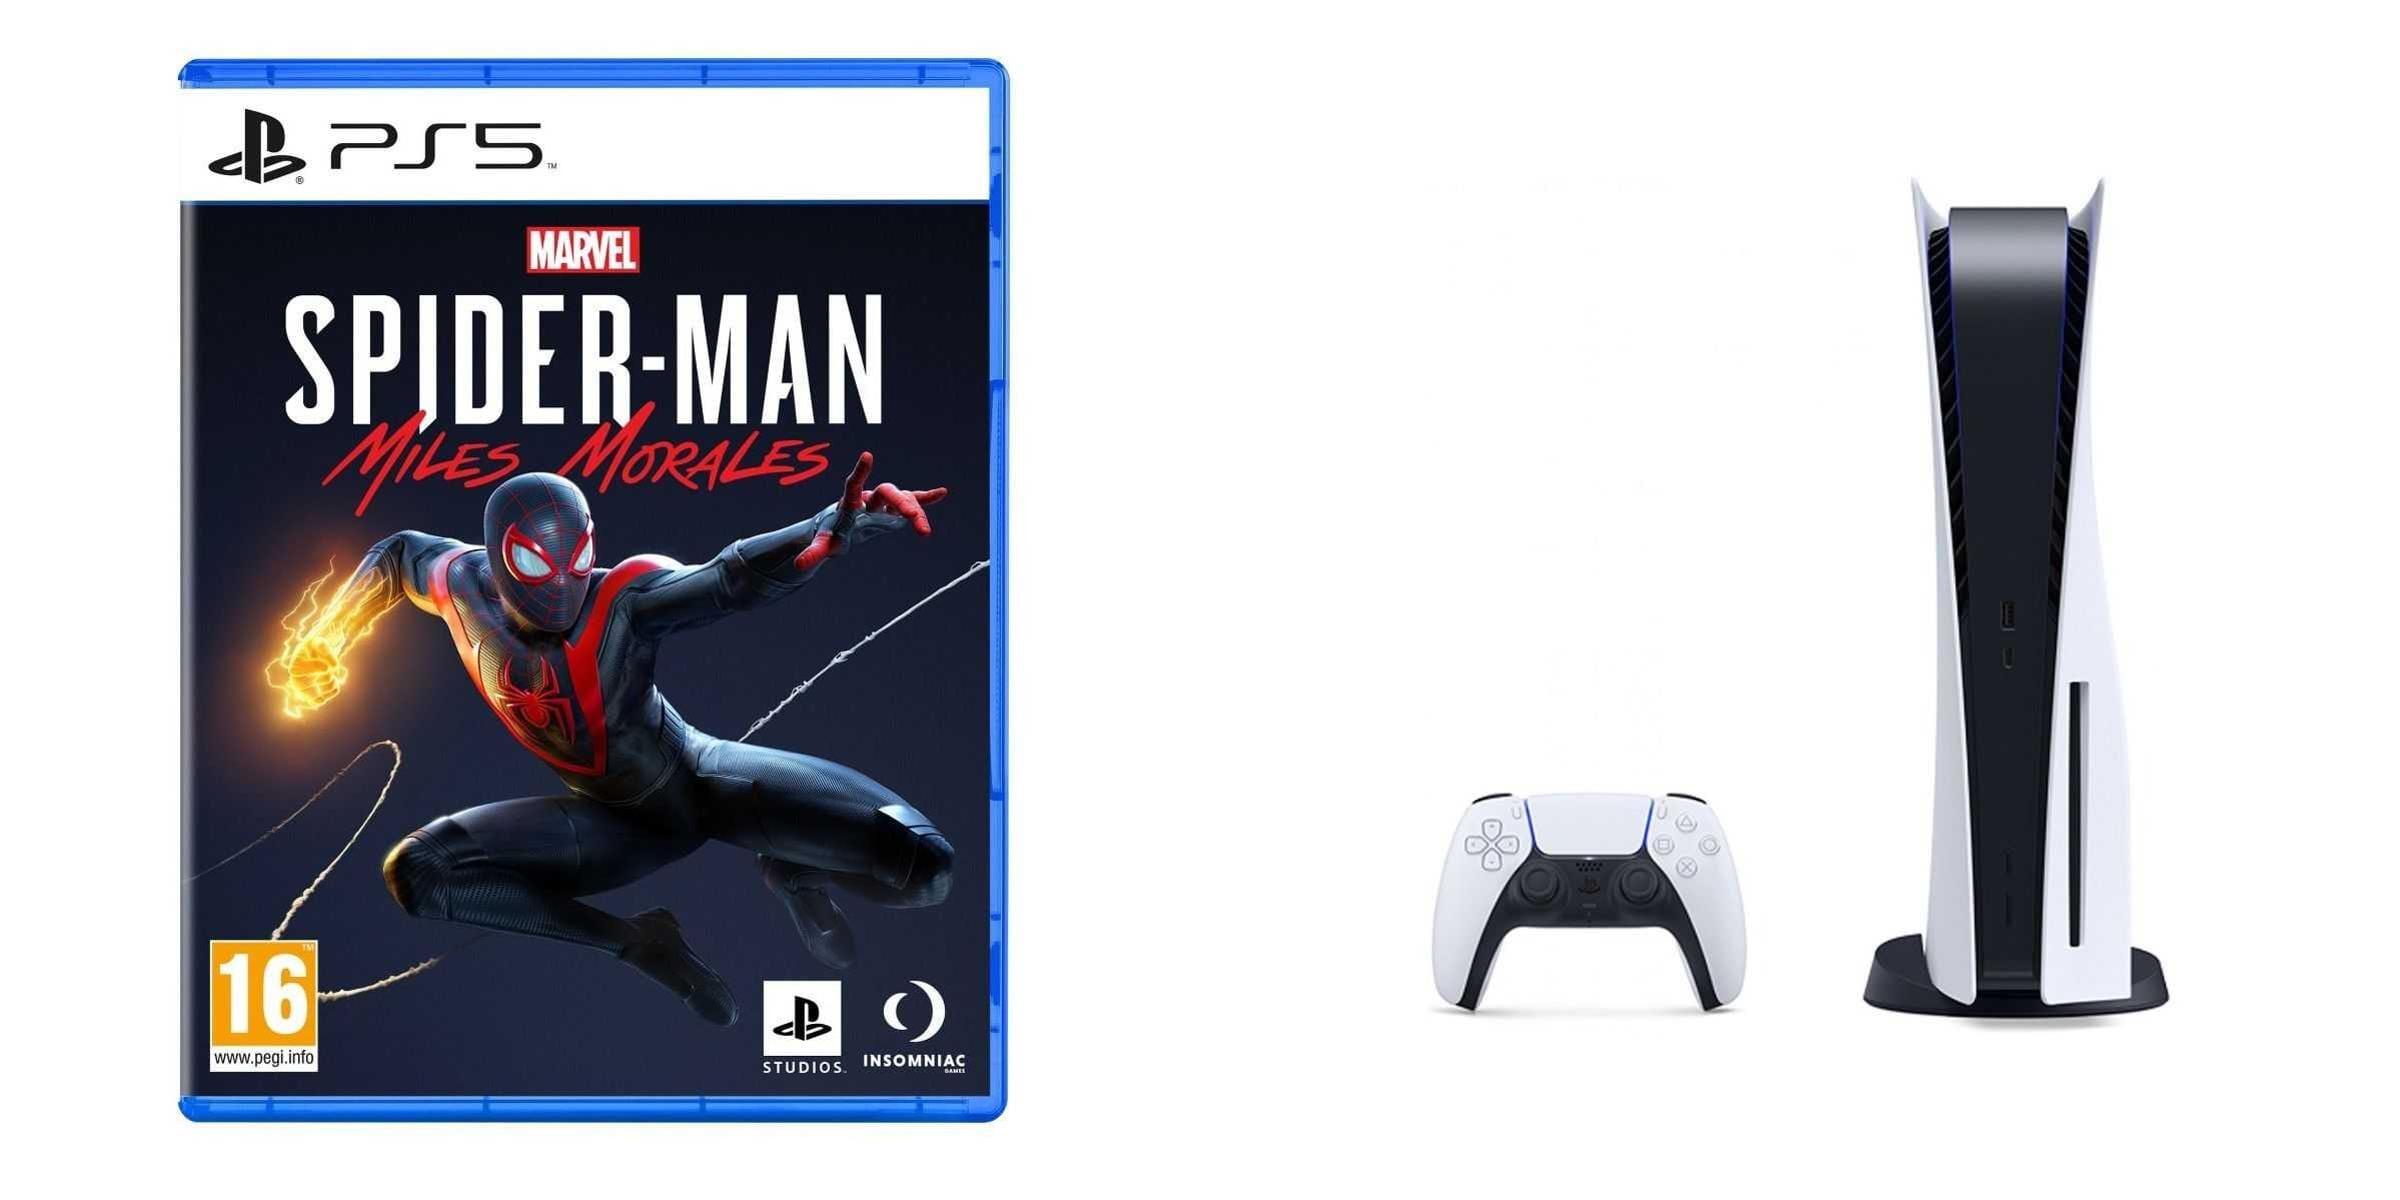 Sony PlayStation 5, 1 Wireless Controller, White - CFI-1016A01 MEE, with Marvel Spider-man Miles Morales for PlayStation5